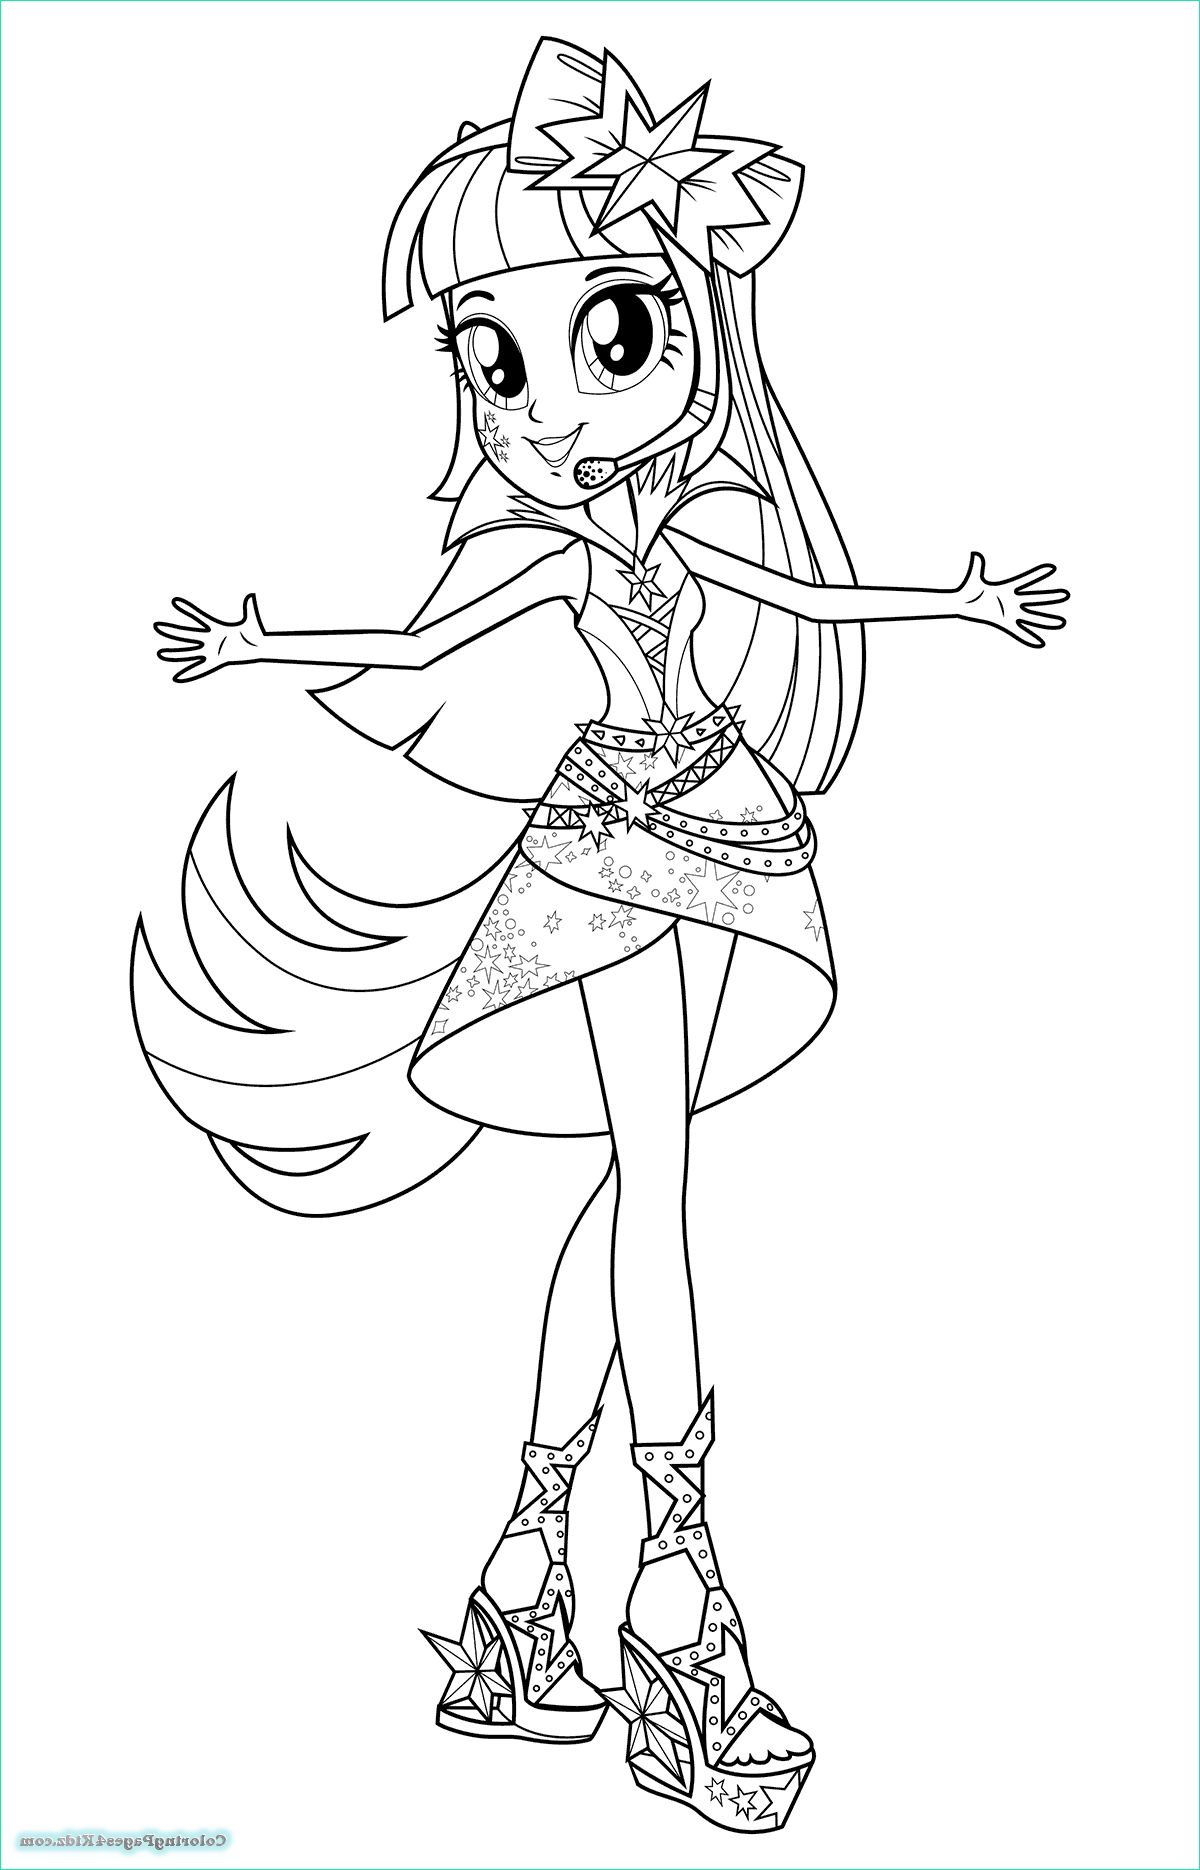 Coloriage My Little Pony Equestria Bestof Photos Rainbow Rocks Equestria Girls Coloring Pages Sketch